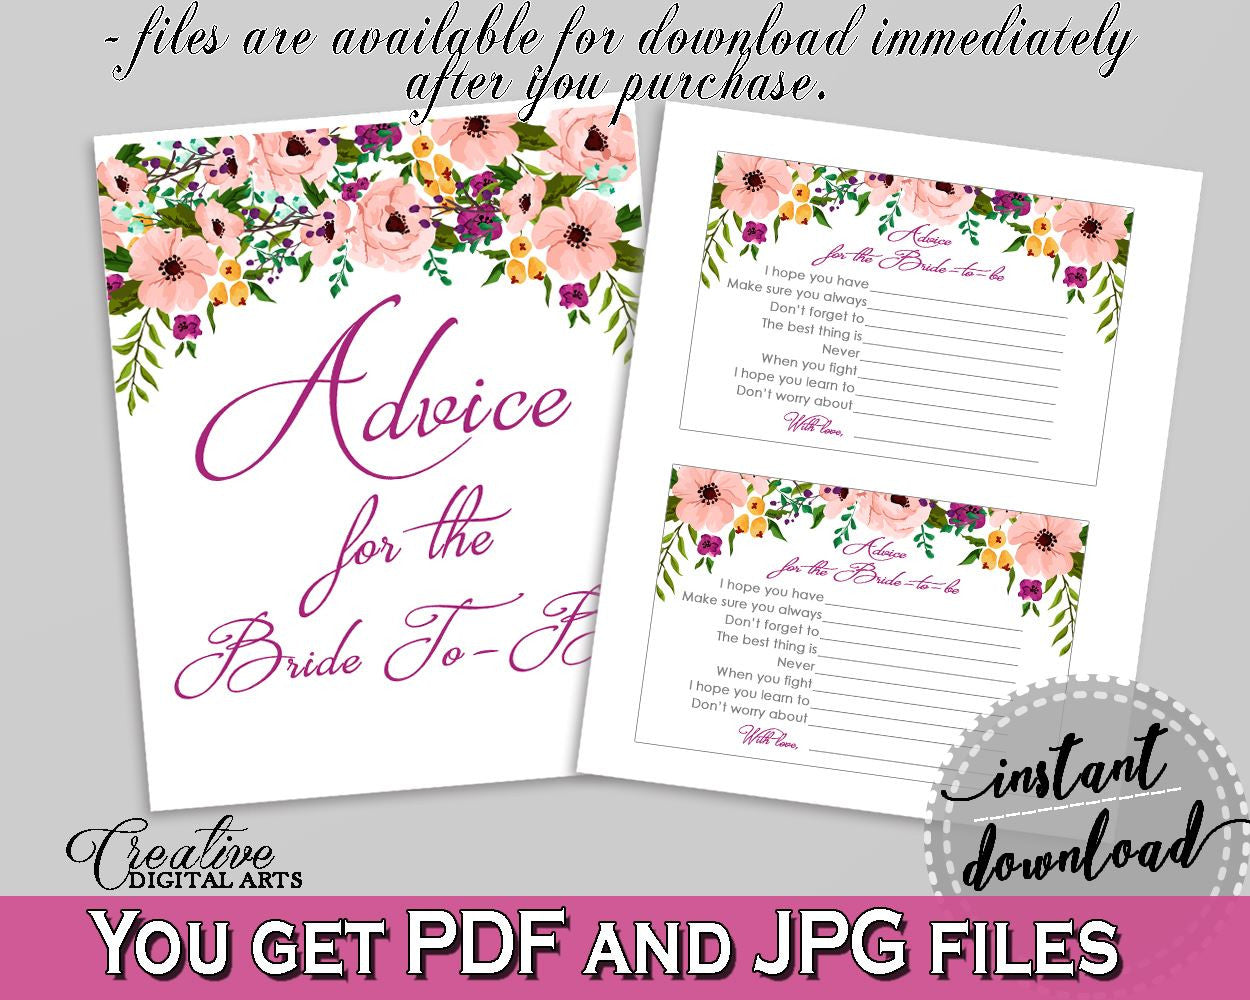 White And Pink Watercolor Flowers Bridal Shower Theme: Advice For The Bride To Be - advice to the bride, party organizing, prints - 9GOY4 - Digital Product